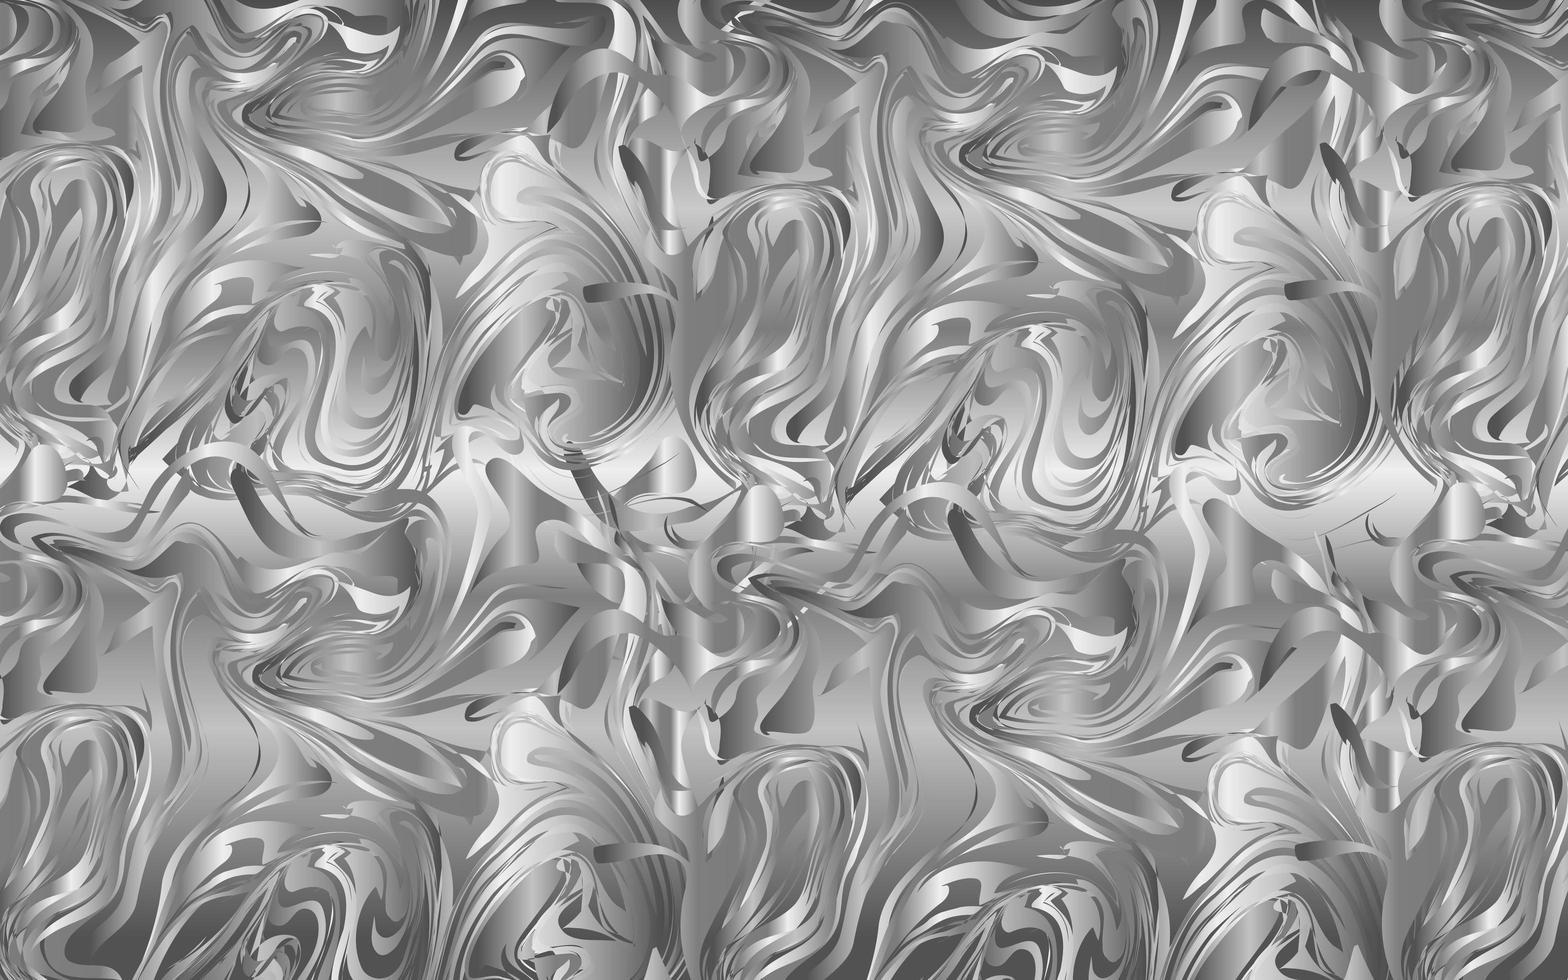 Modern Black and white background with wavy liquify effect. Modern dynamic design created with organic flowing lines and shapes. Liquid metal mercury silver ripple abstract background photo